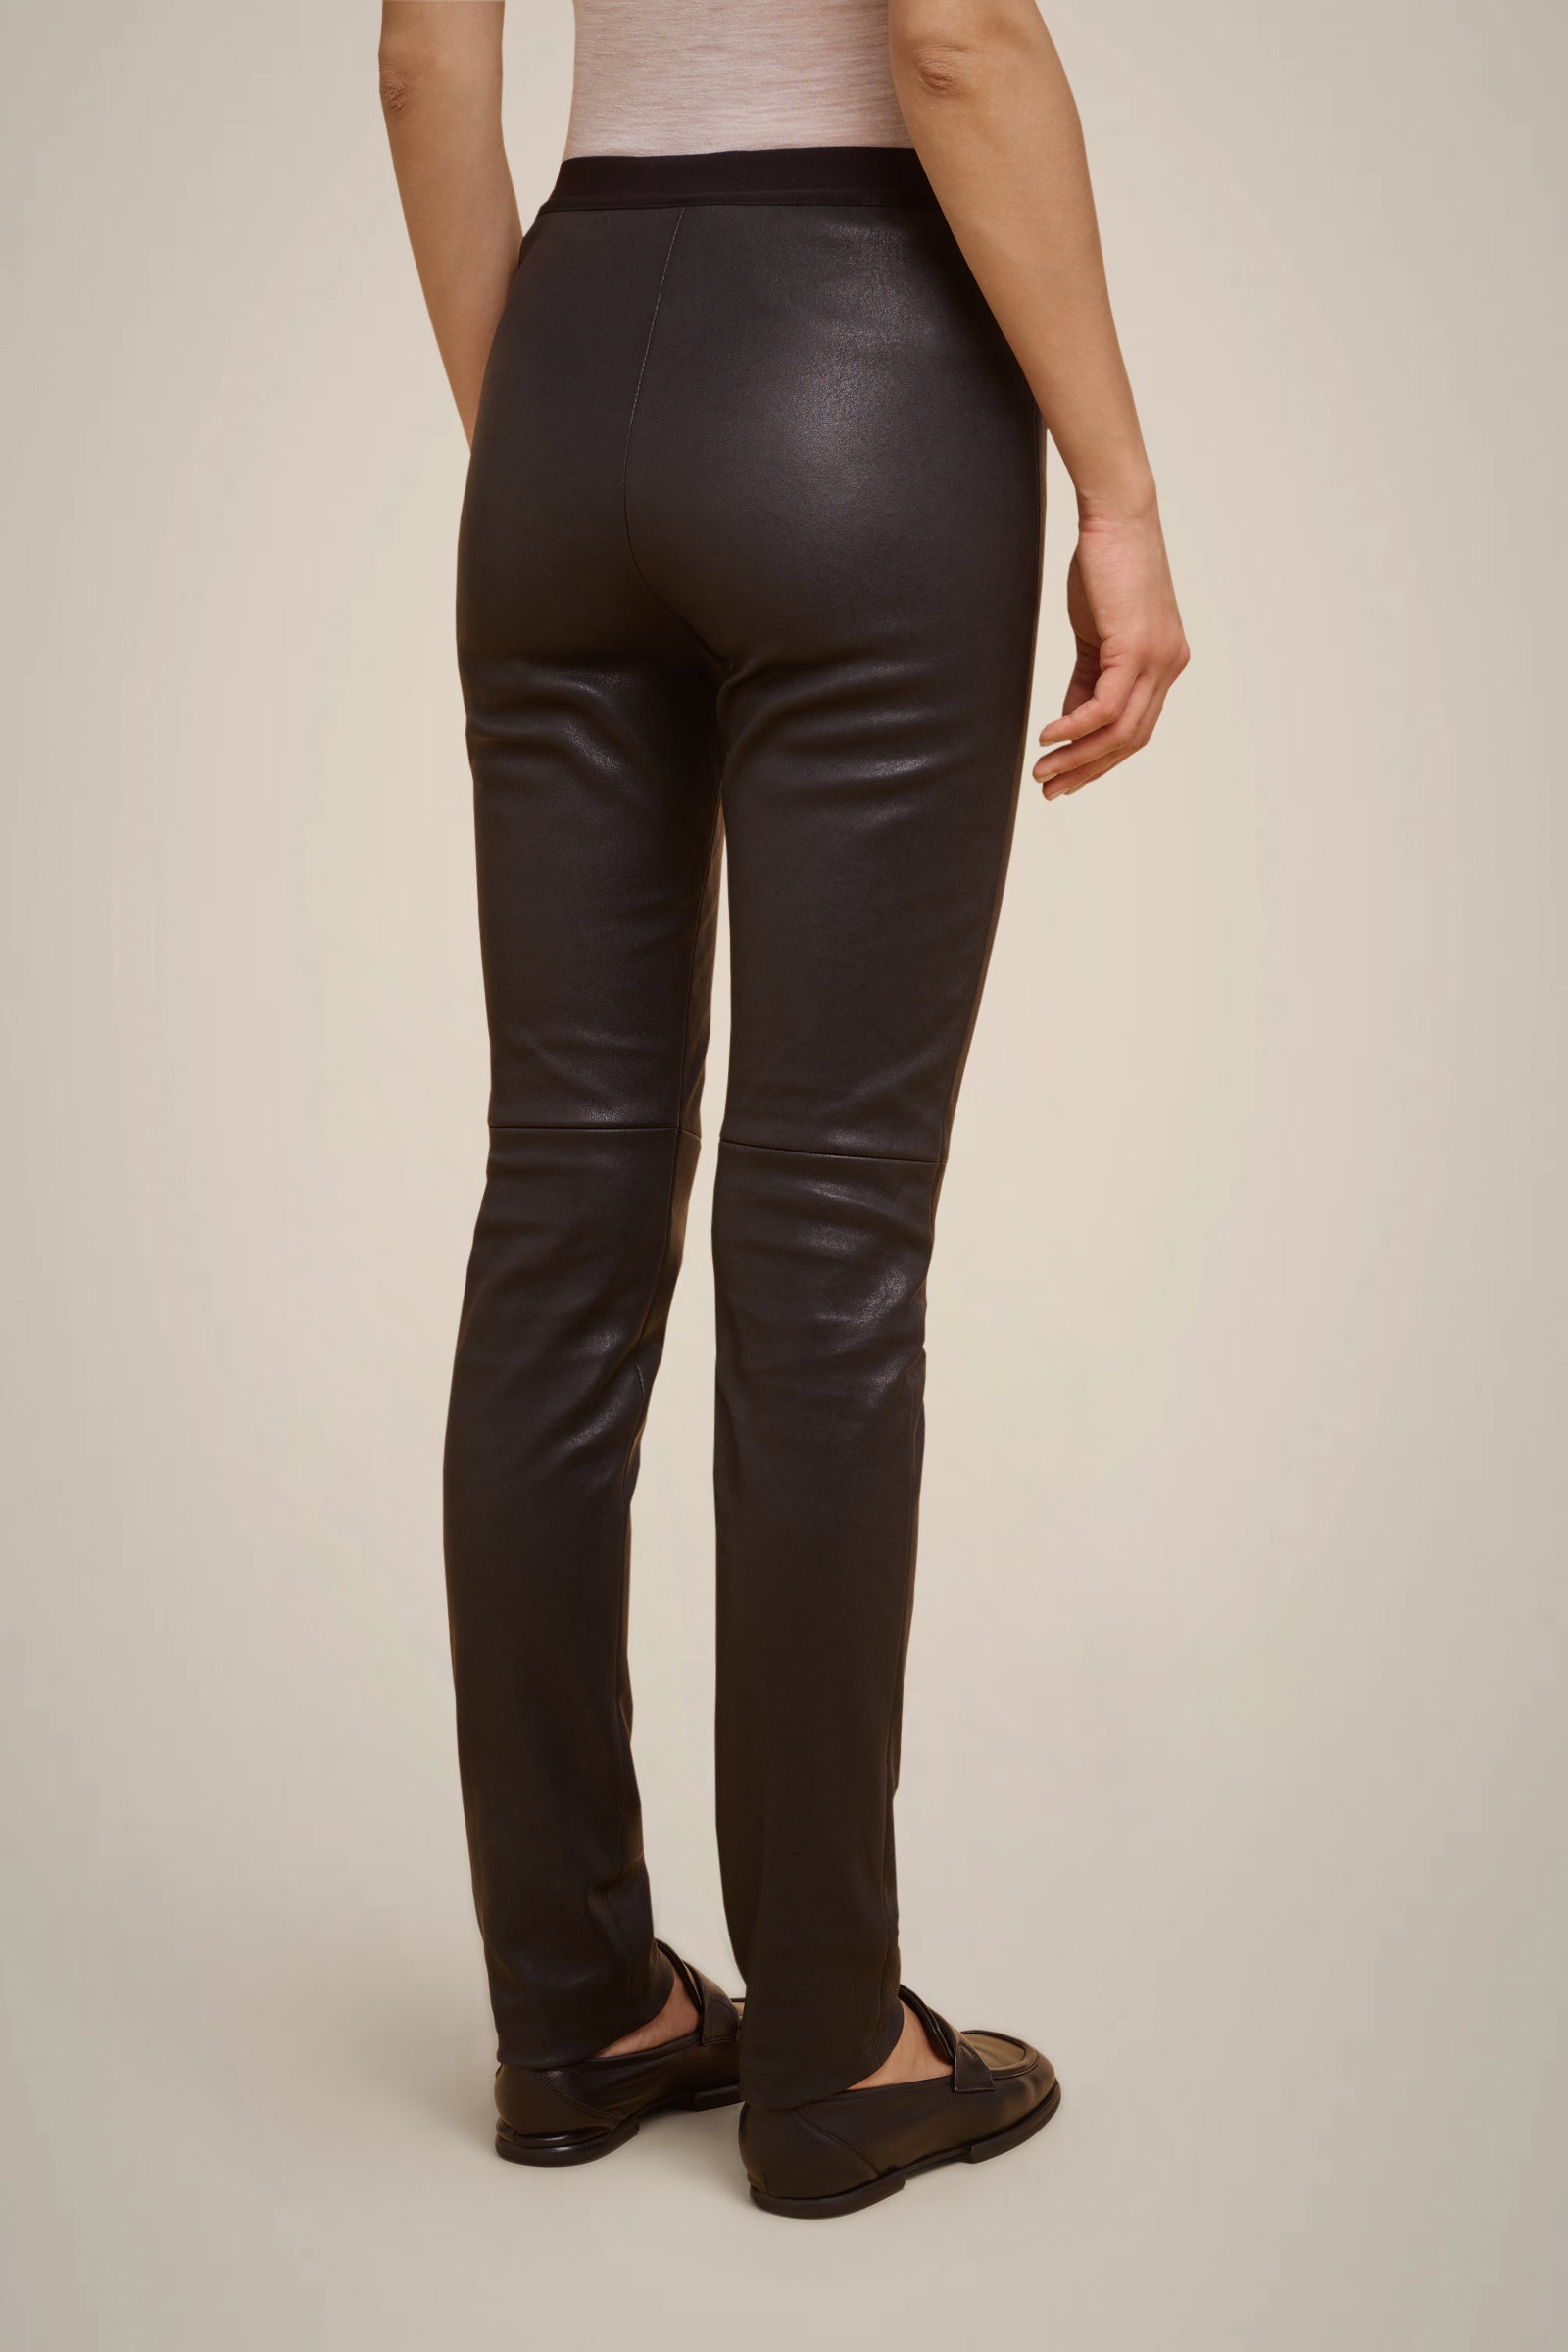 REAL LEATHER LEGGINGS